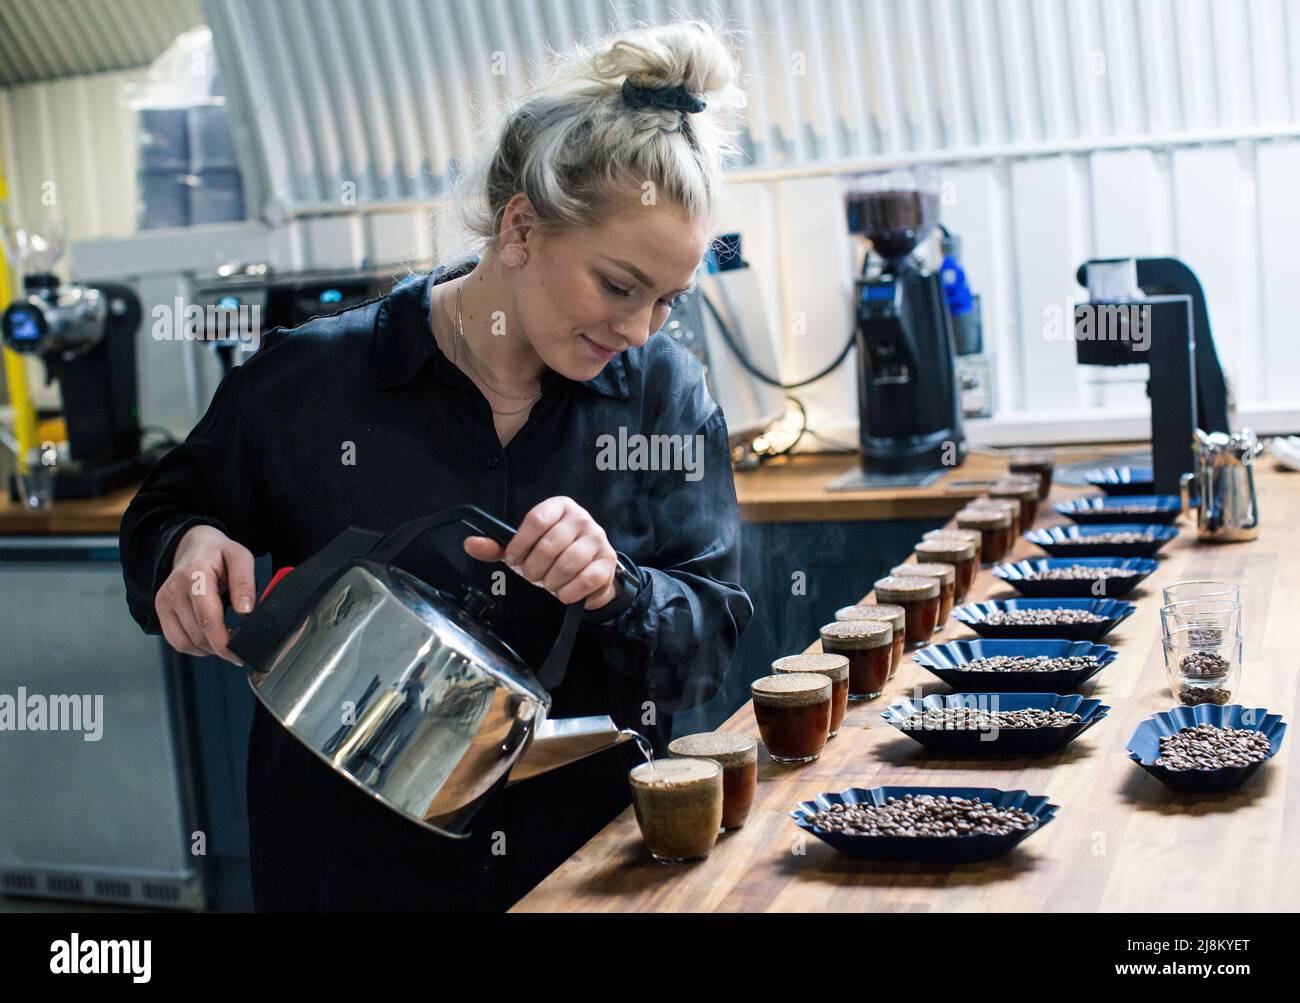 woman pouring water into glasses for tasting coffee cupping and coffee tasting Stock Photo